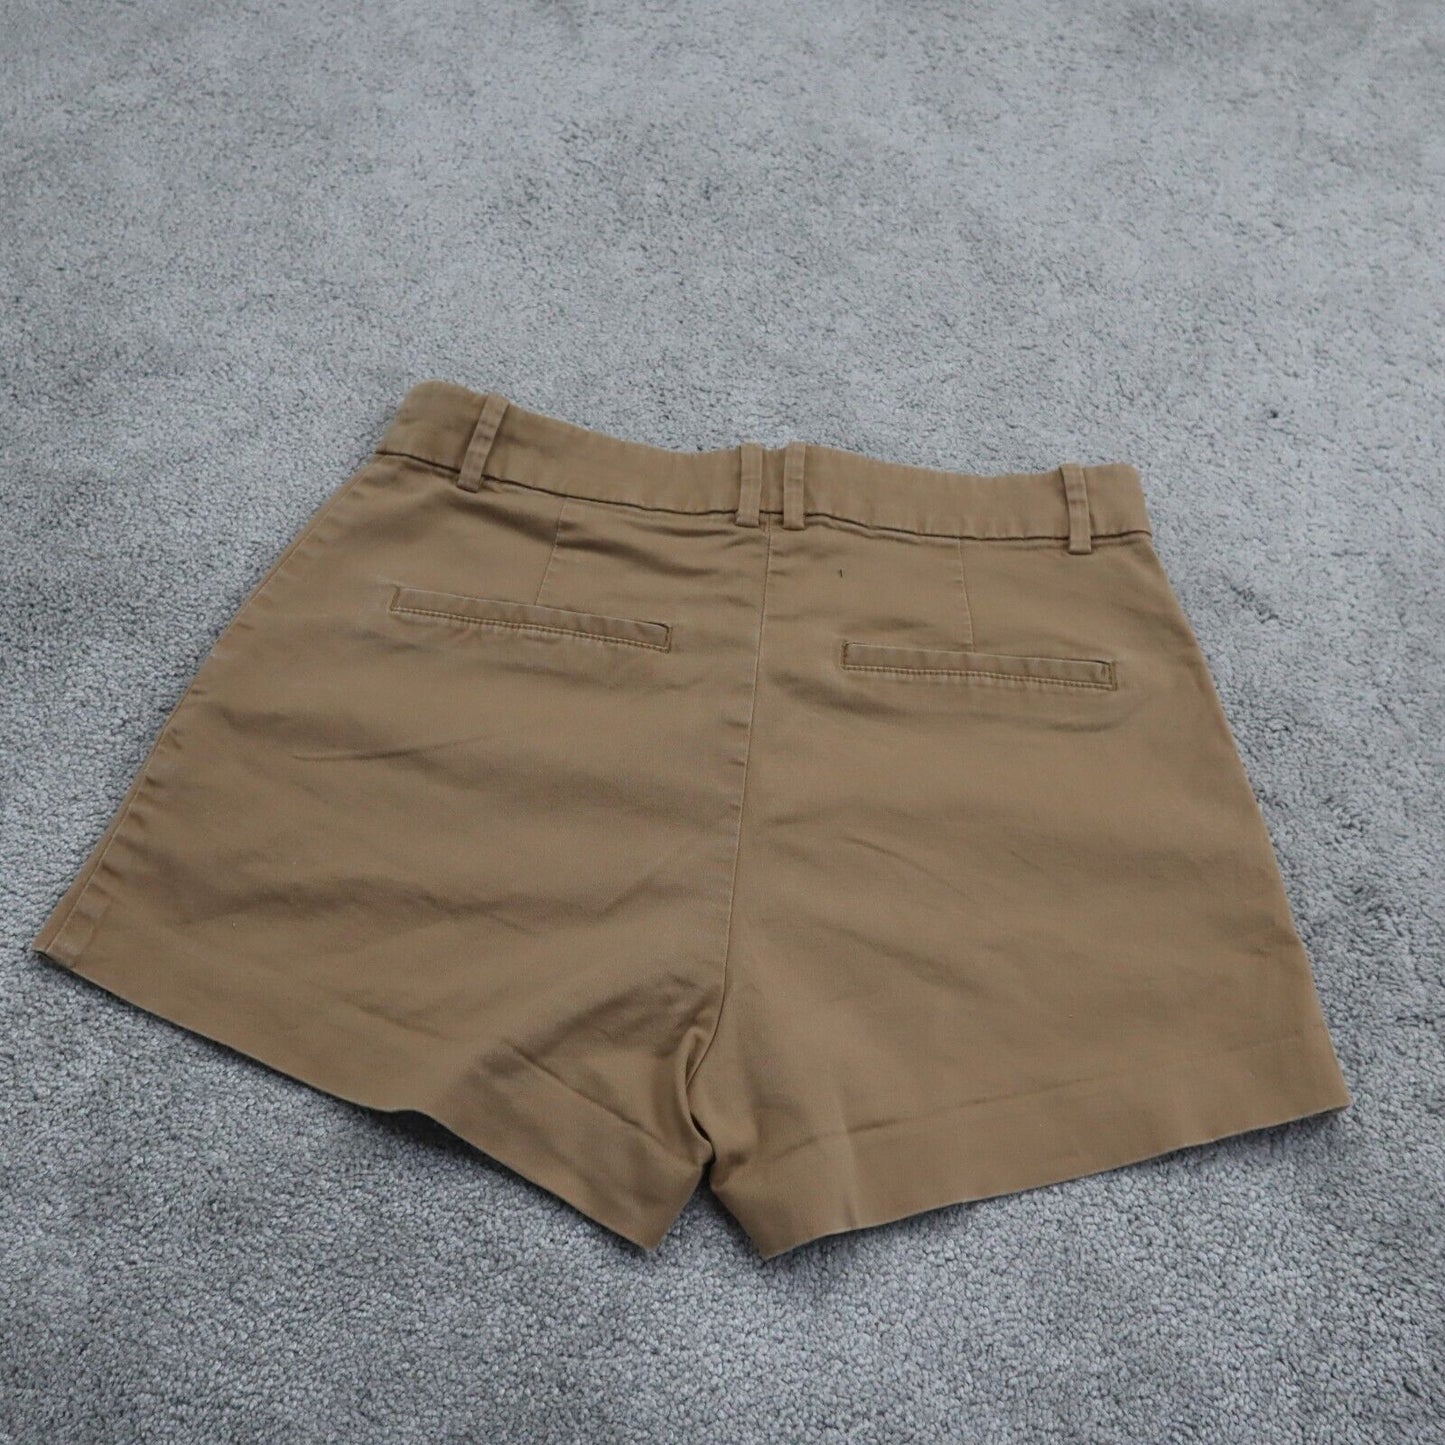 H&M Womens Chino Shorts Mid Rise Distressed Stretch Pockets Brown Size 6